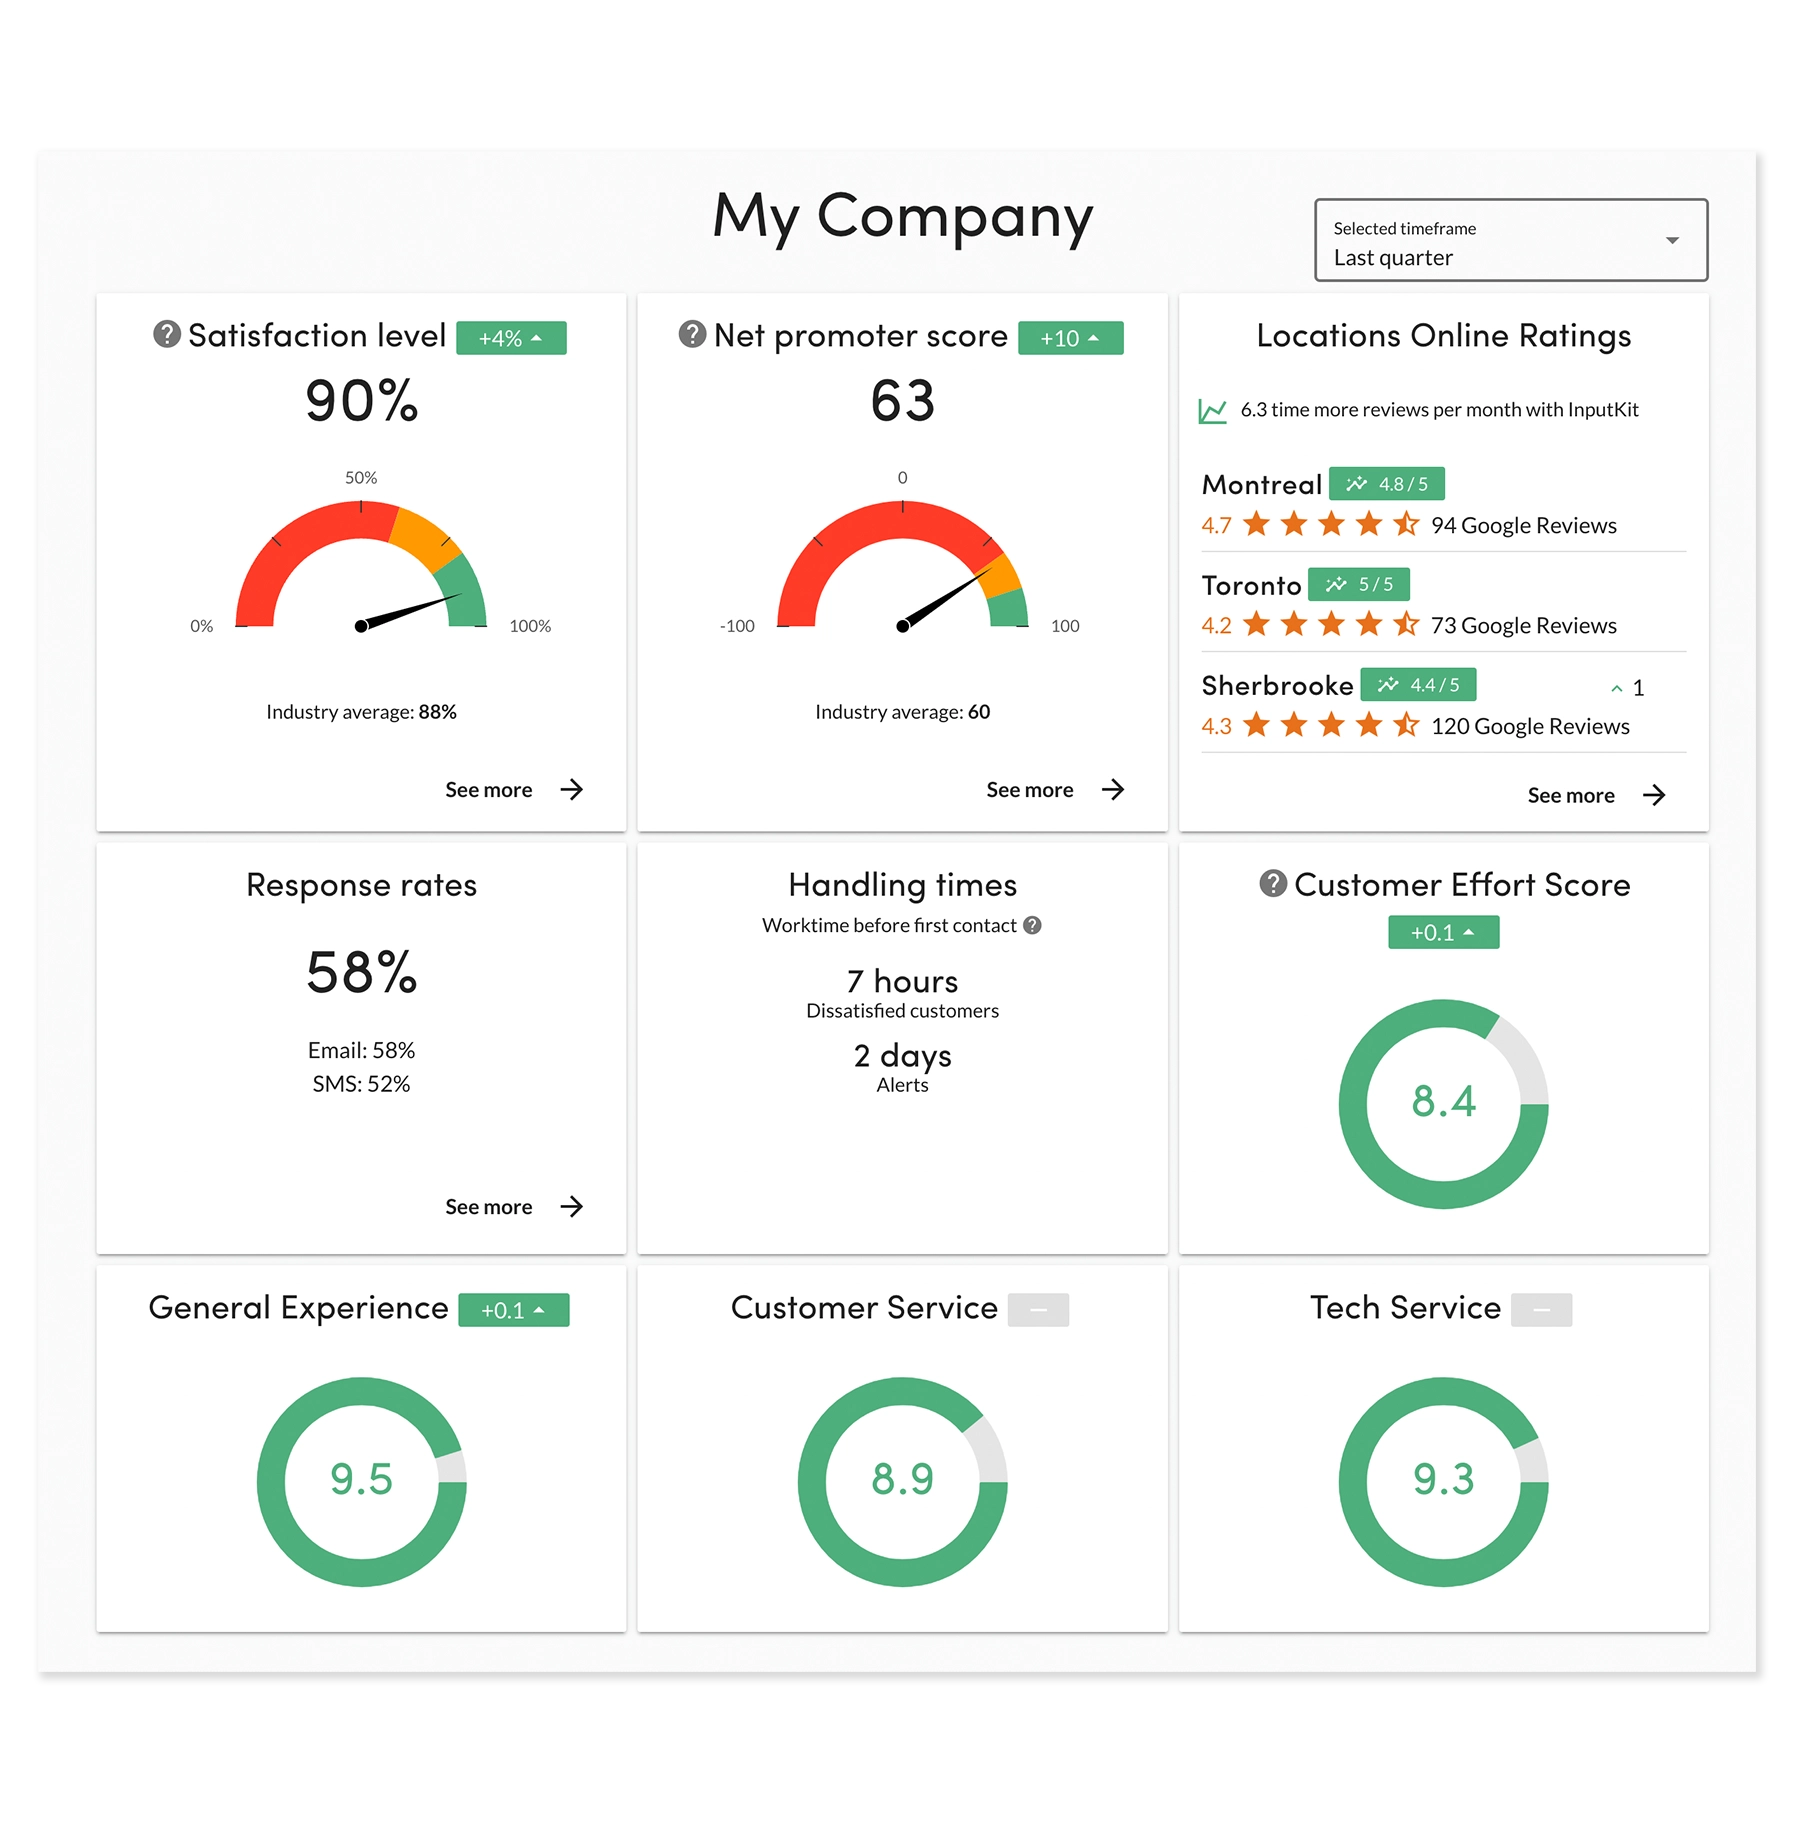 Monitor in real-time the performance indicators that matter to you.